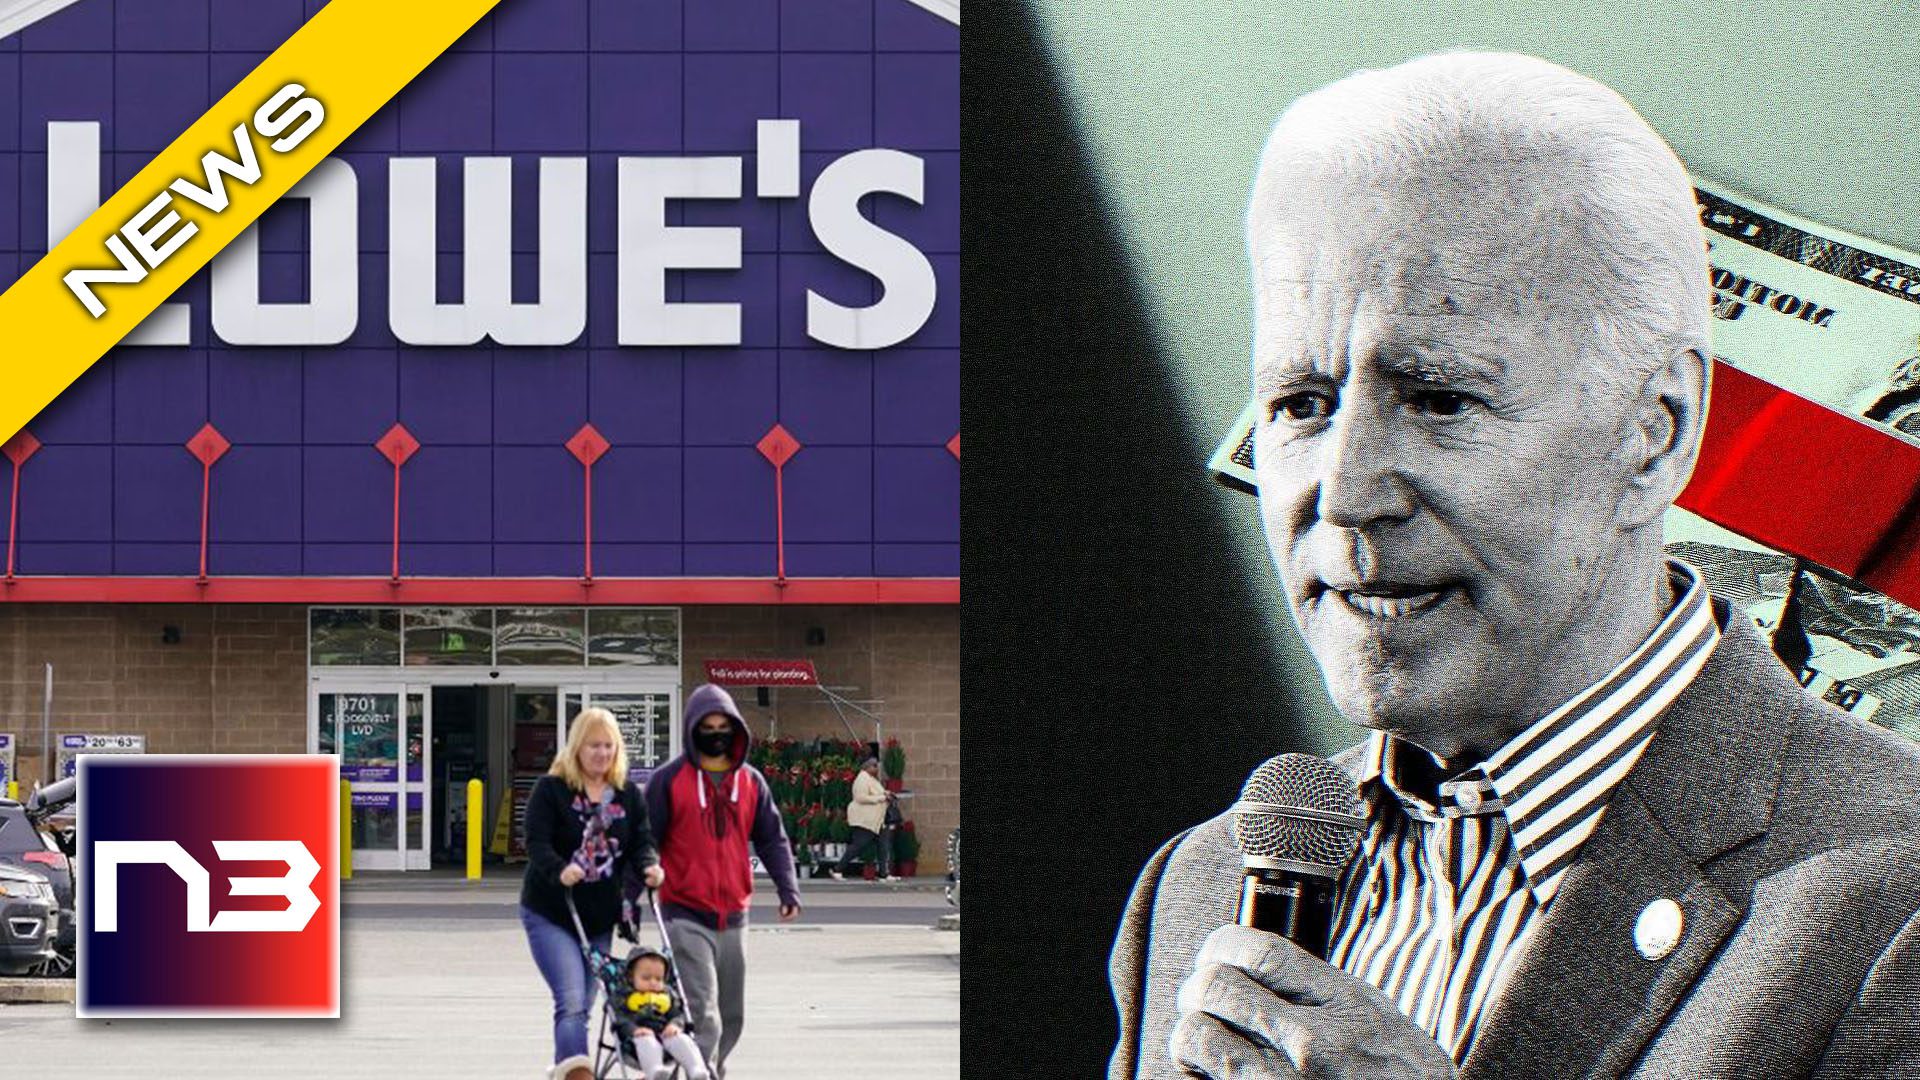 Lowe's just put all other companies to shame with this incredible move